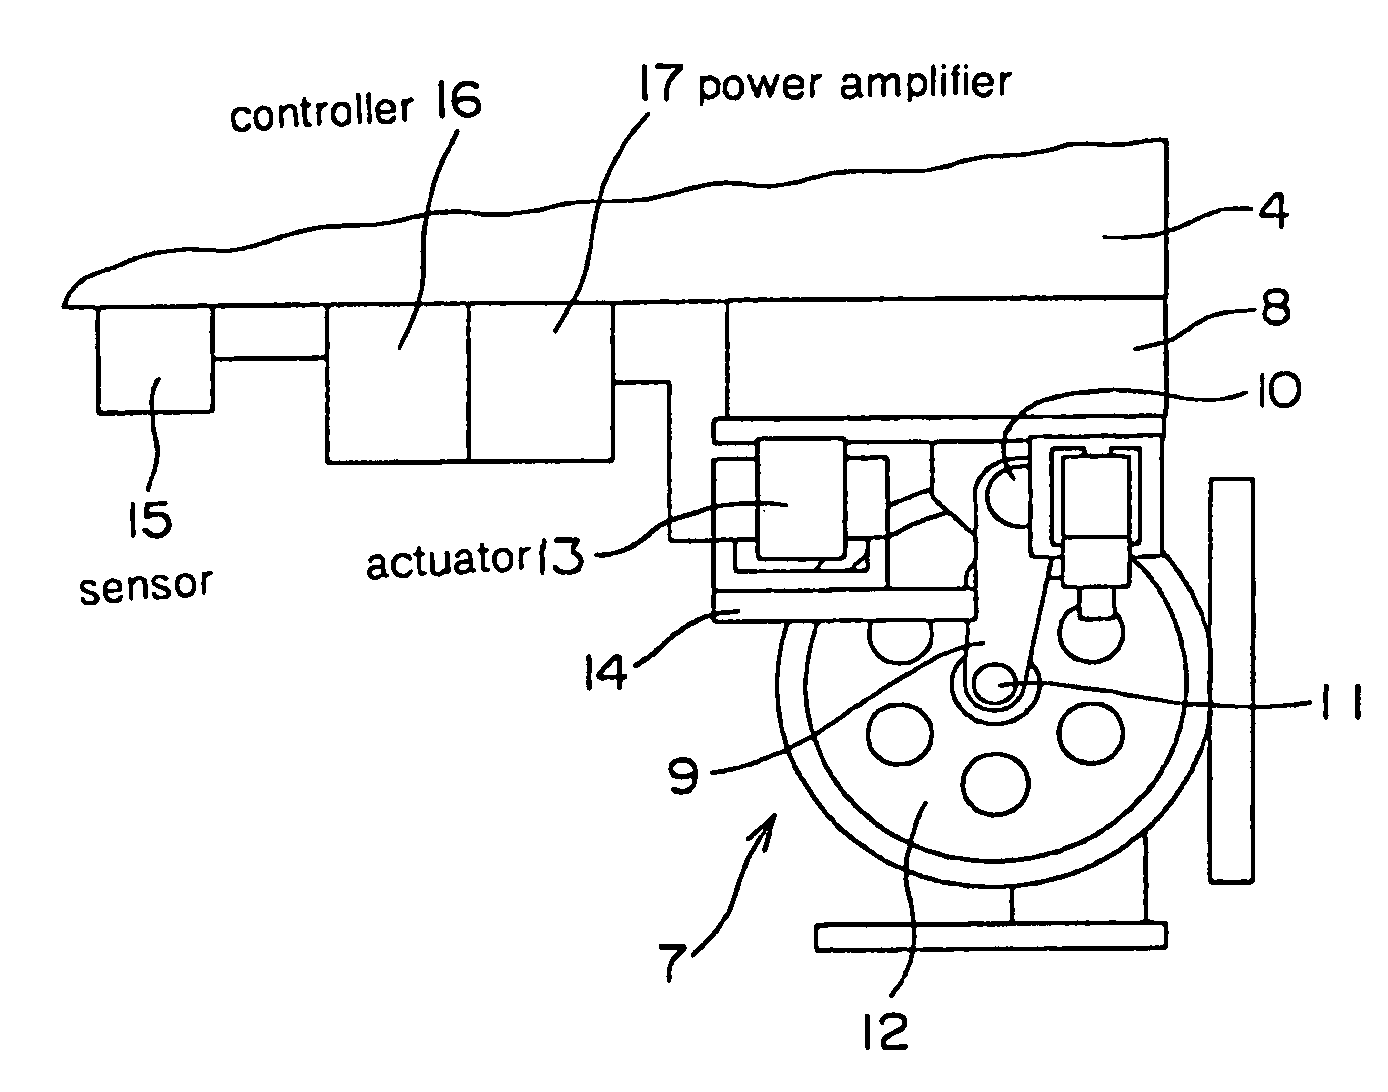 Active horizontal vibration reducing device for elevator